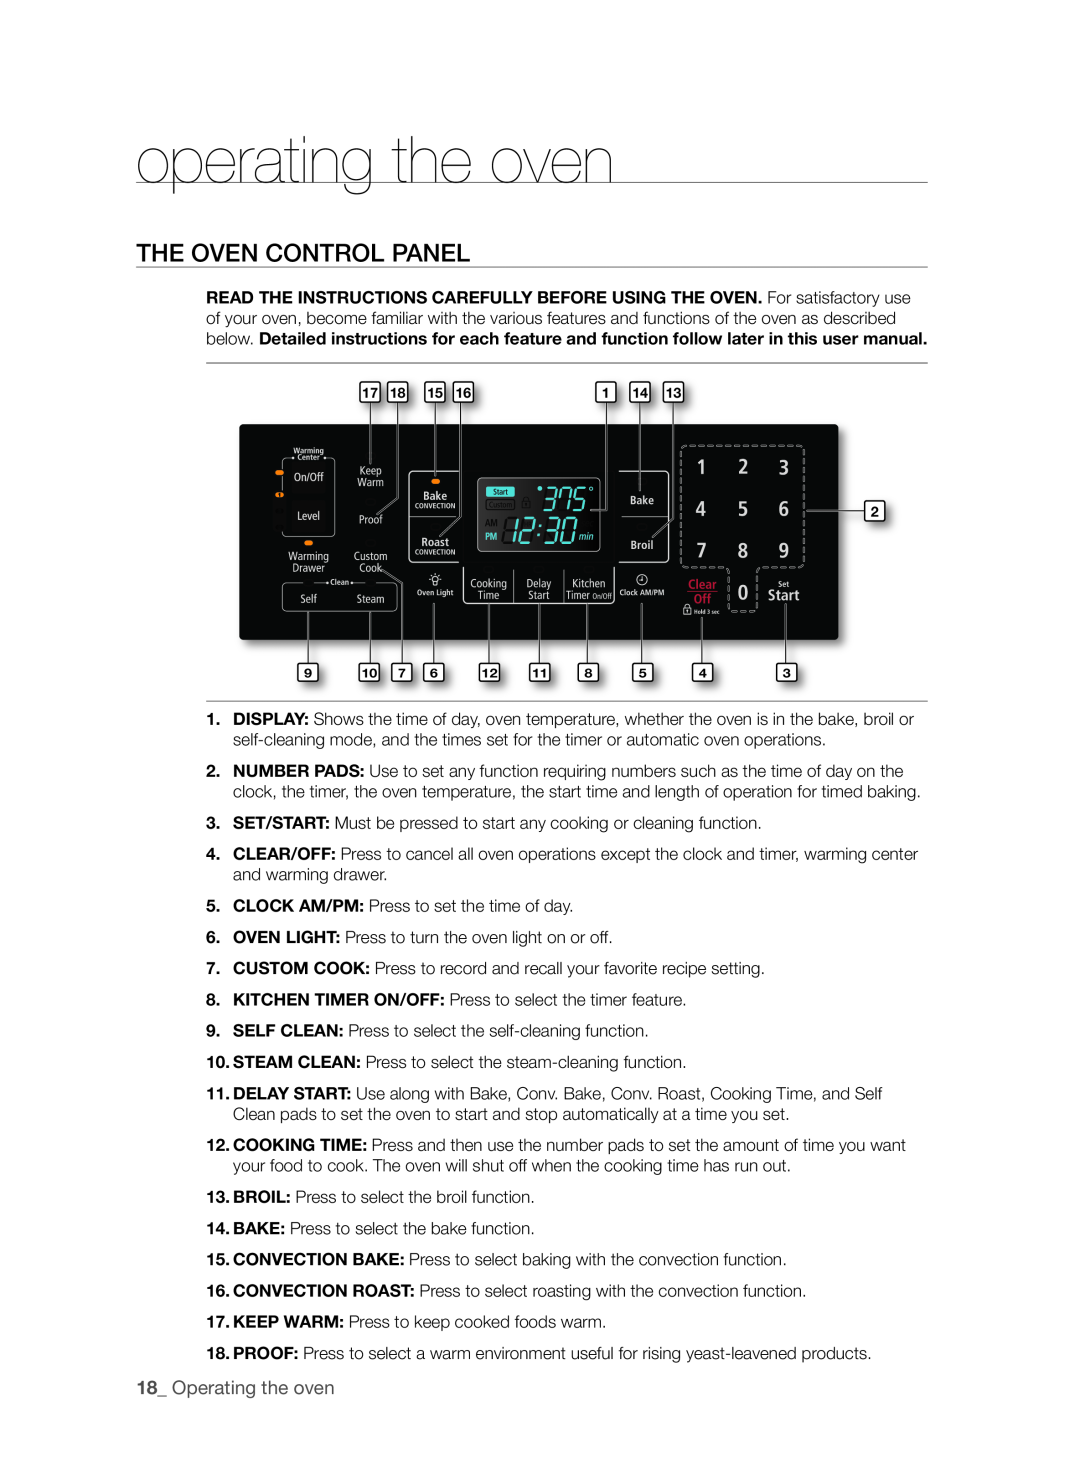 Samsung FTQ353 user manual operating the oven, The Oven Control Panel, 1 Operating the oven 